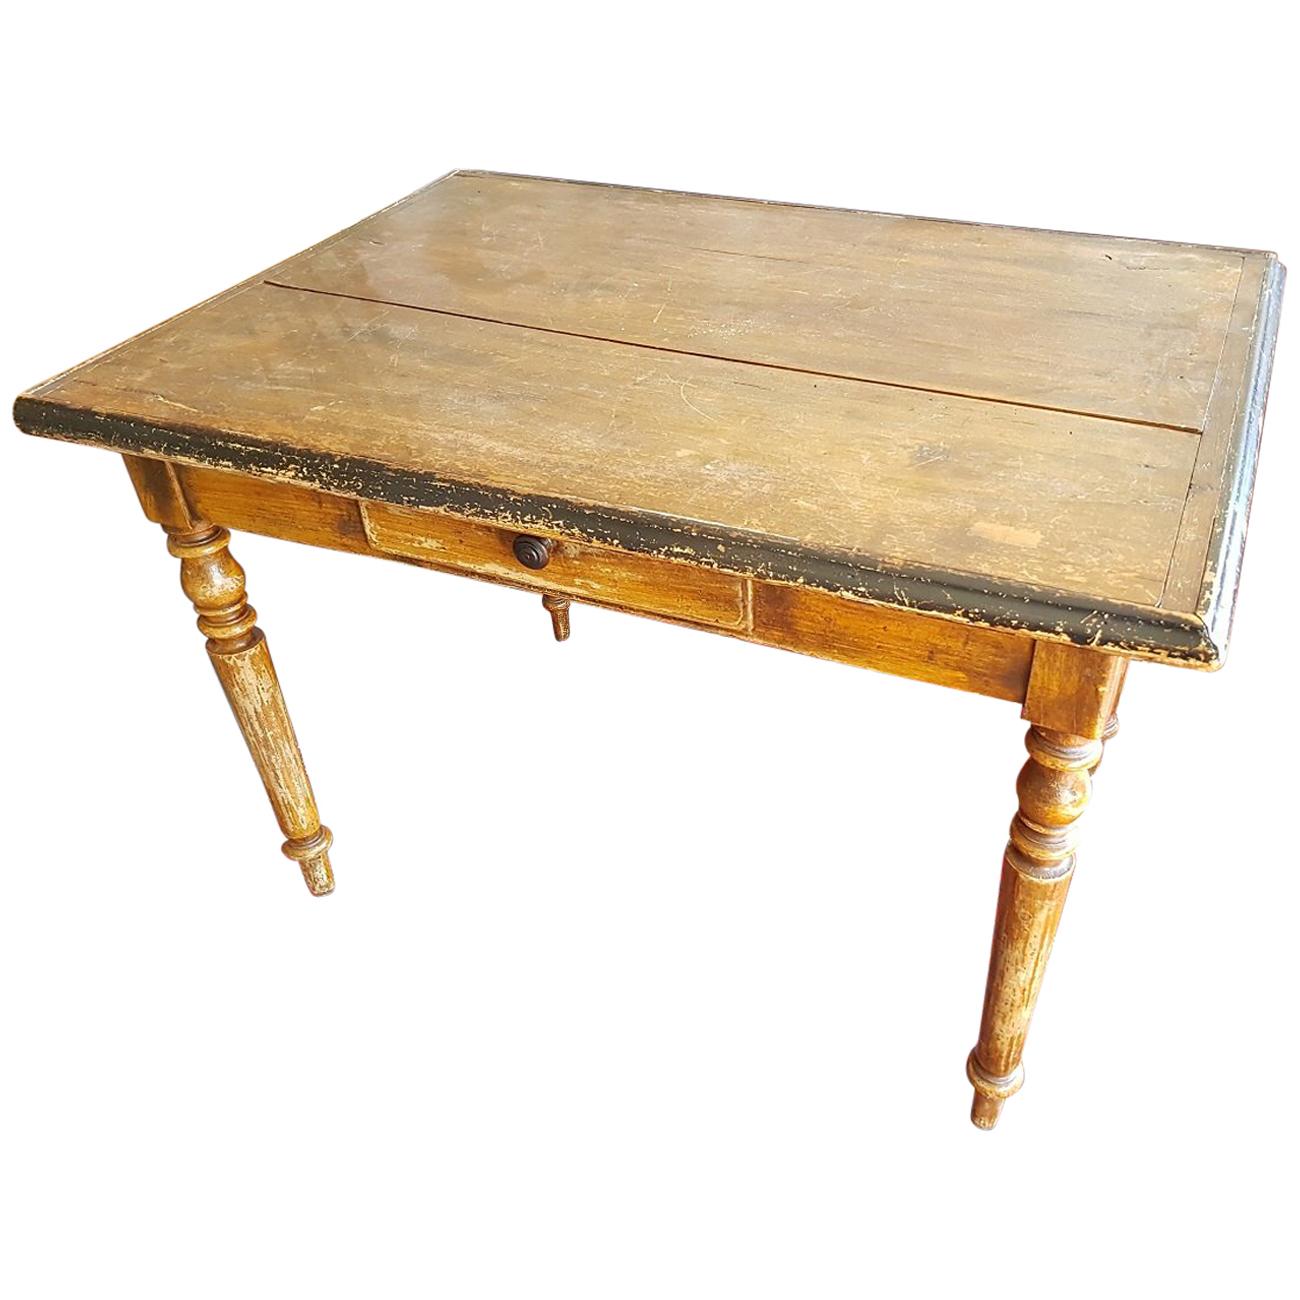 Late 19th Century French Pine Wood Farmers Table